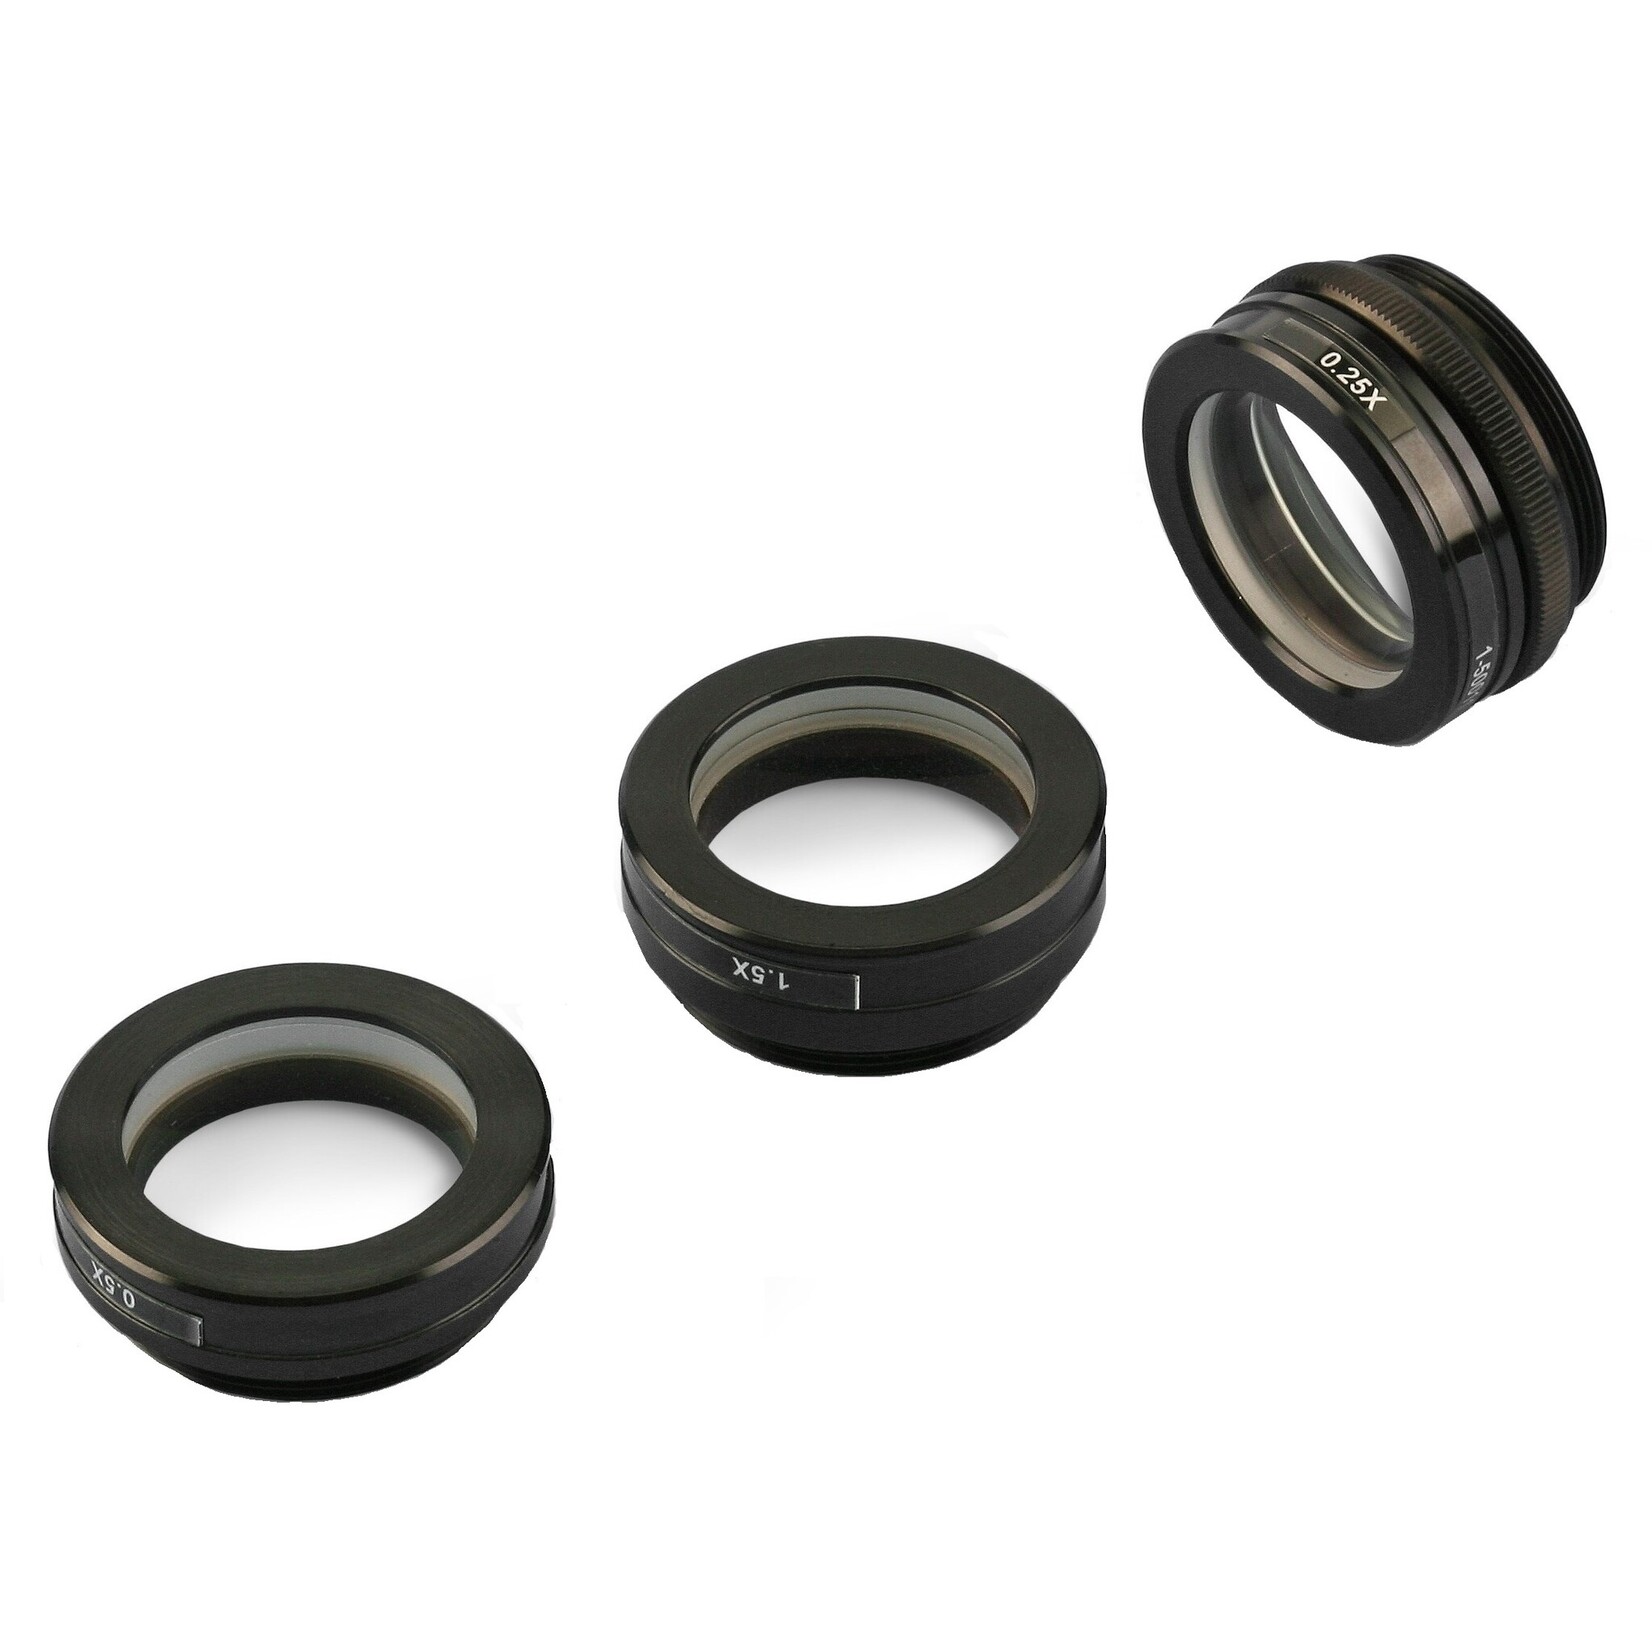 Attachment lenses from 0.25 to 2x for changing the magnification and working distance